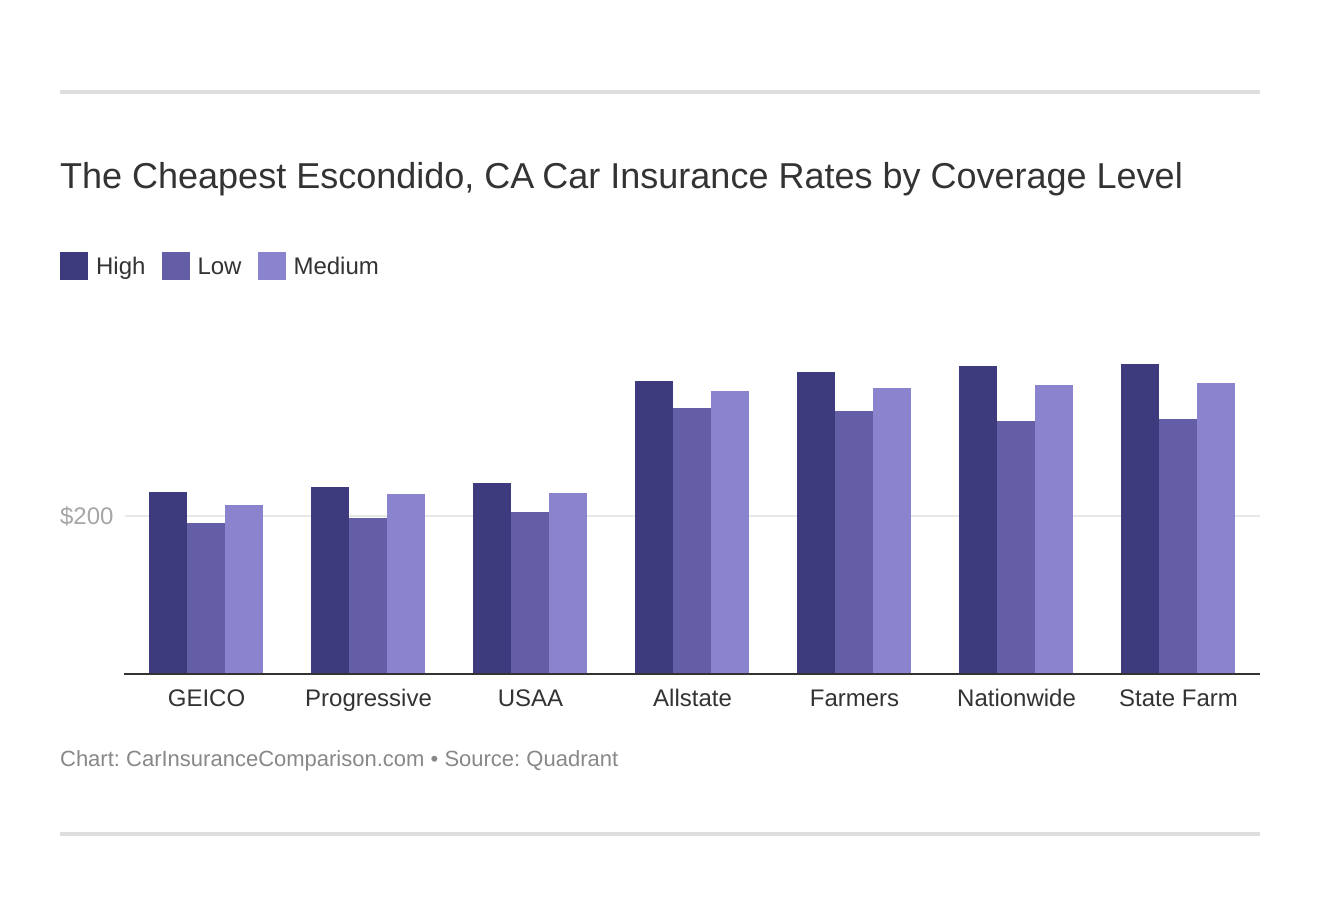 The Cheapest Escondido, CA Car Insurance Rates by Coverage Level